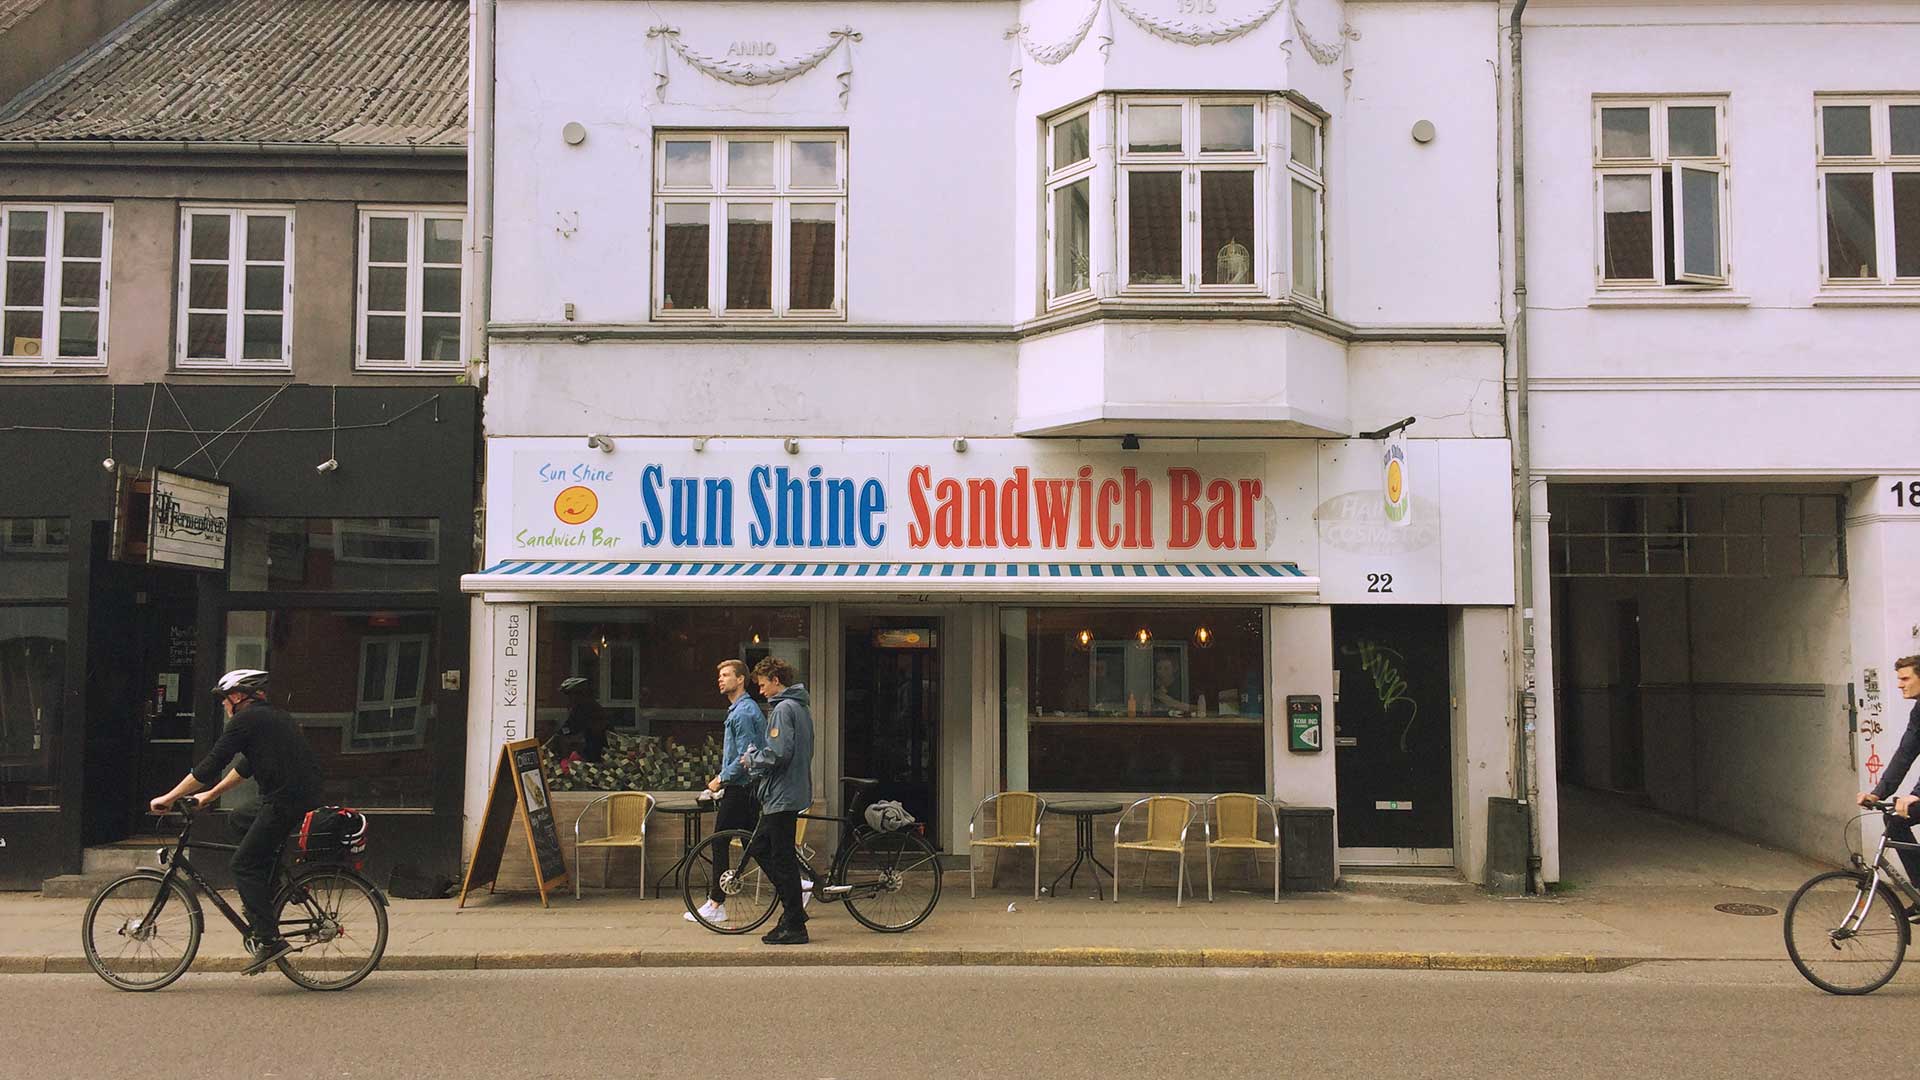 A picture of the exterior of Sunshine Sandwich bar